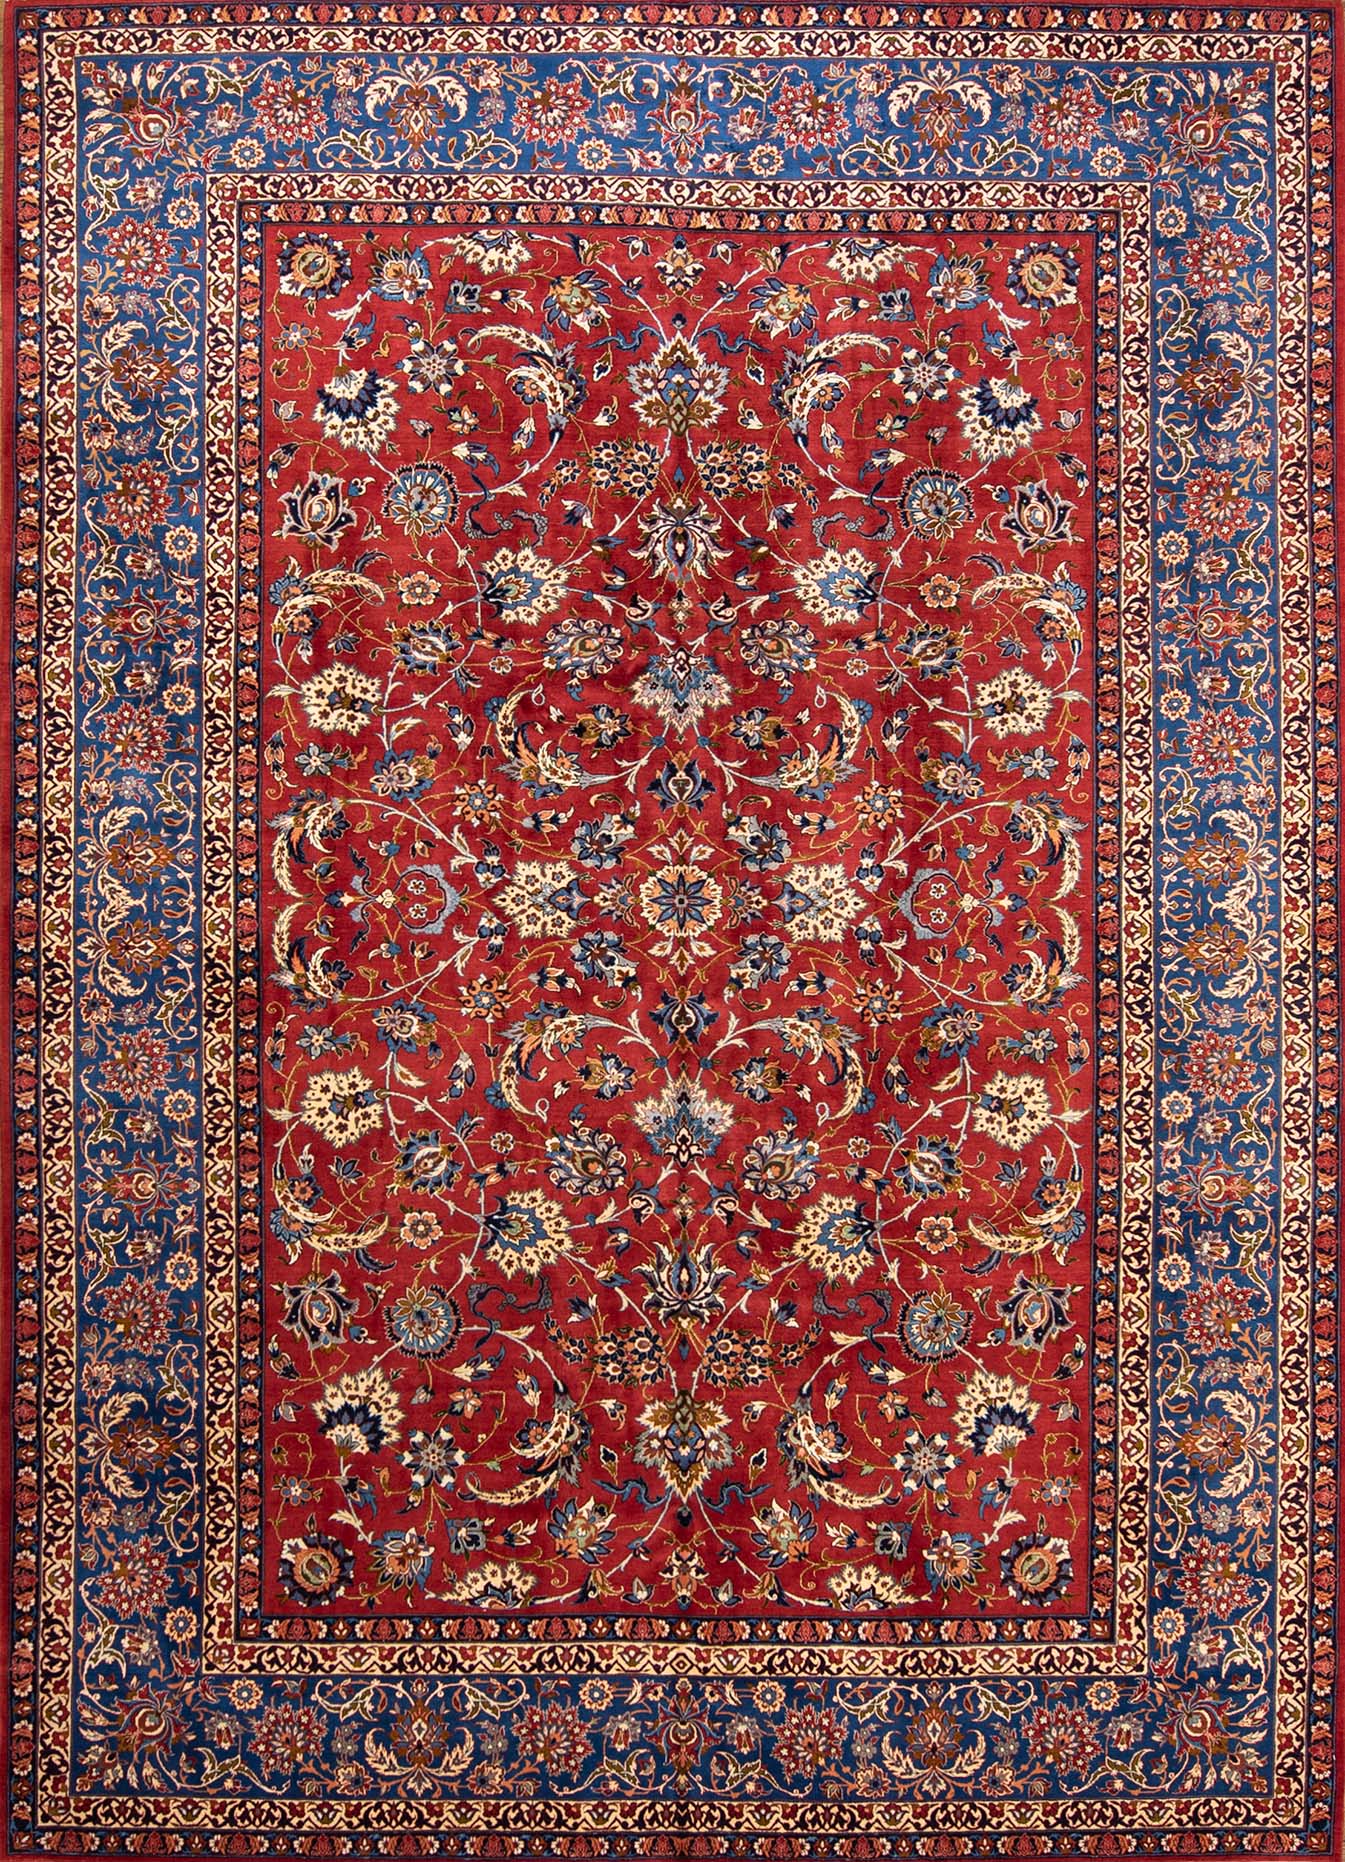 Vintage Persian rug. Handmade Persian Isfahan floral allover design wool rug in terracotta and blue colors. Size 10.3x14.5.